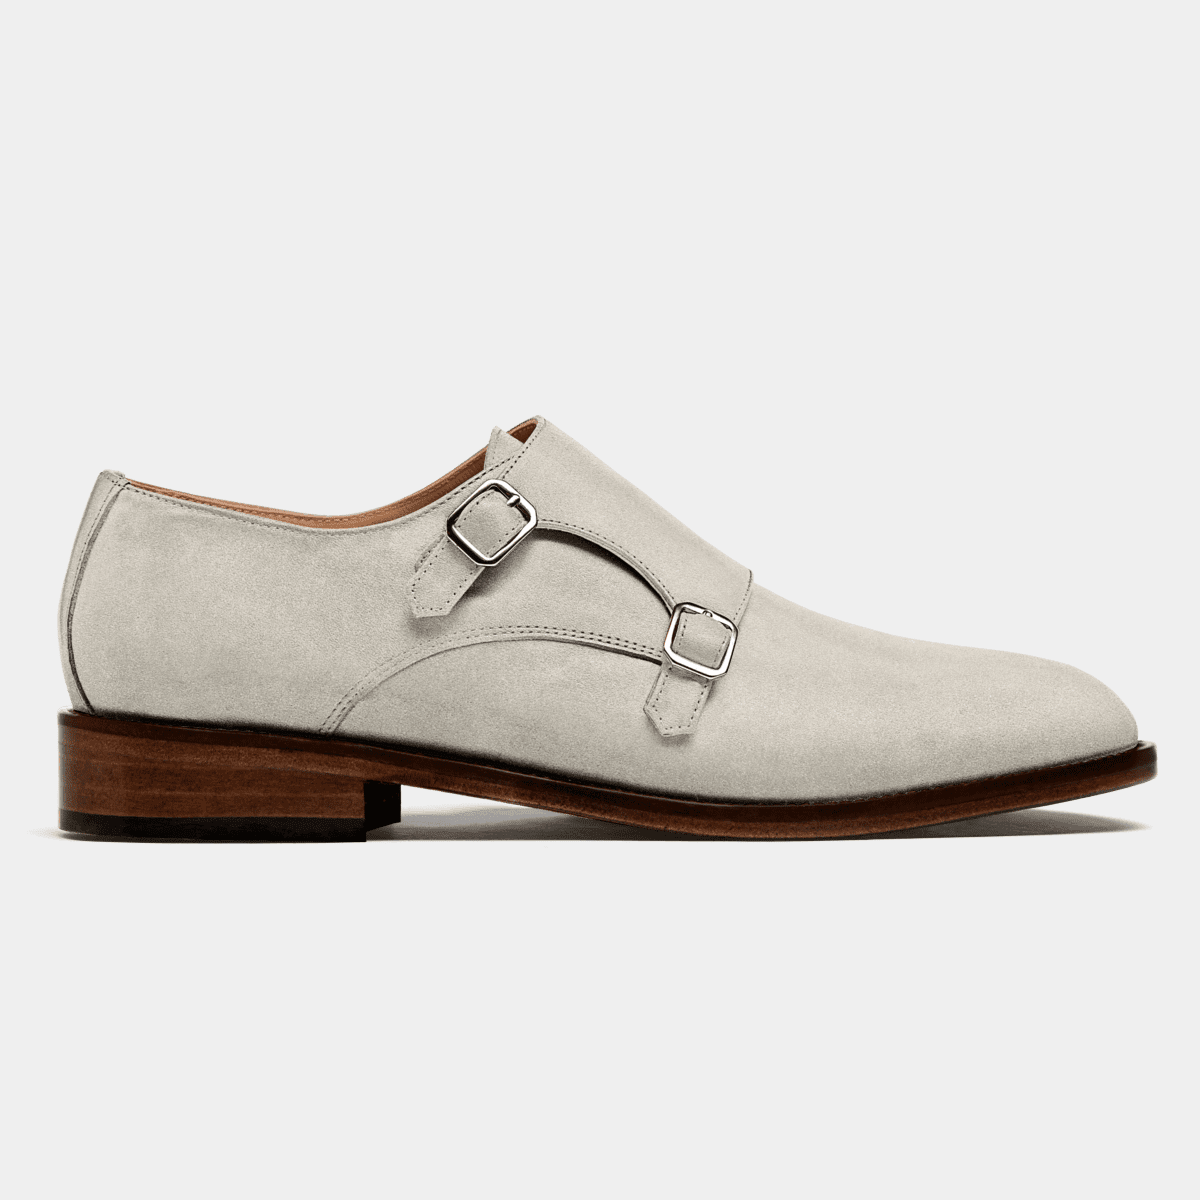 Double monk strap shoes - beige suede | Hockerty